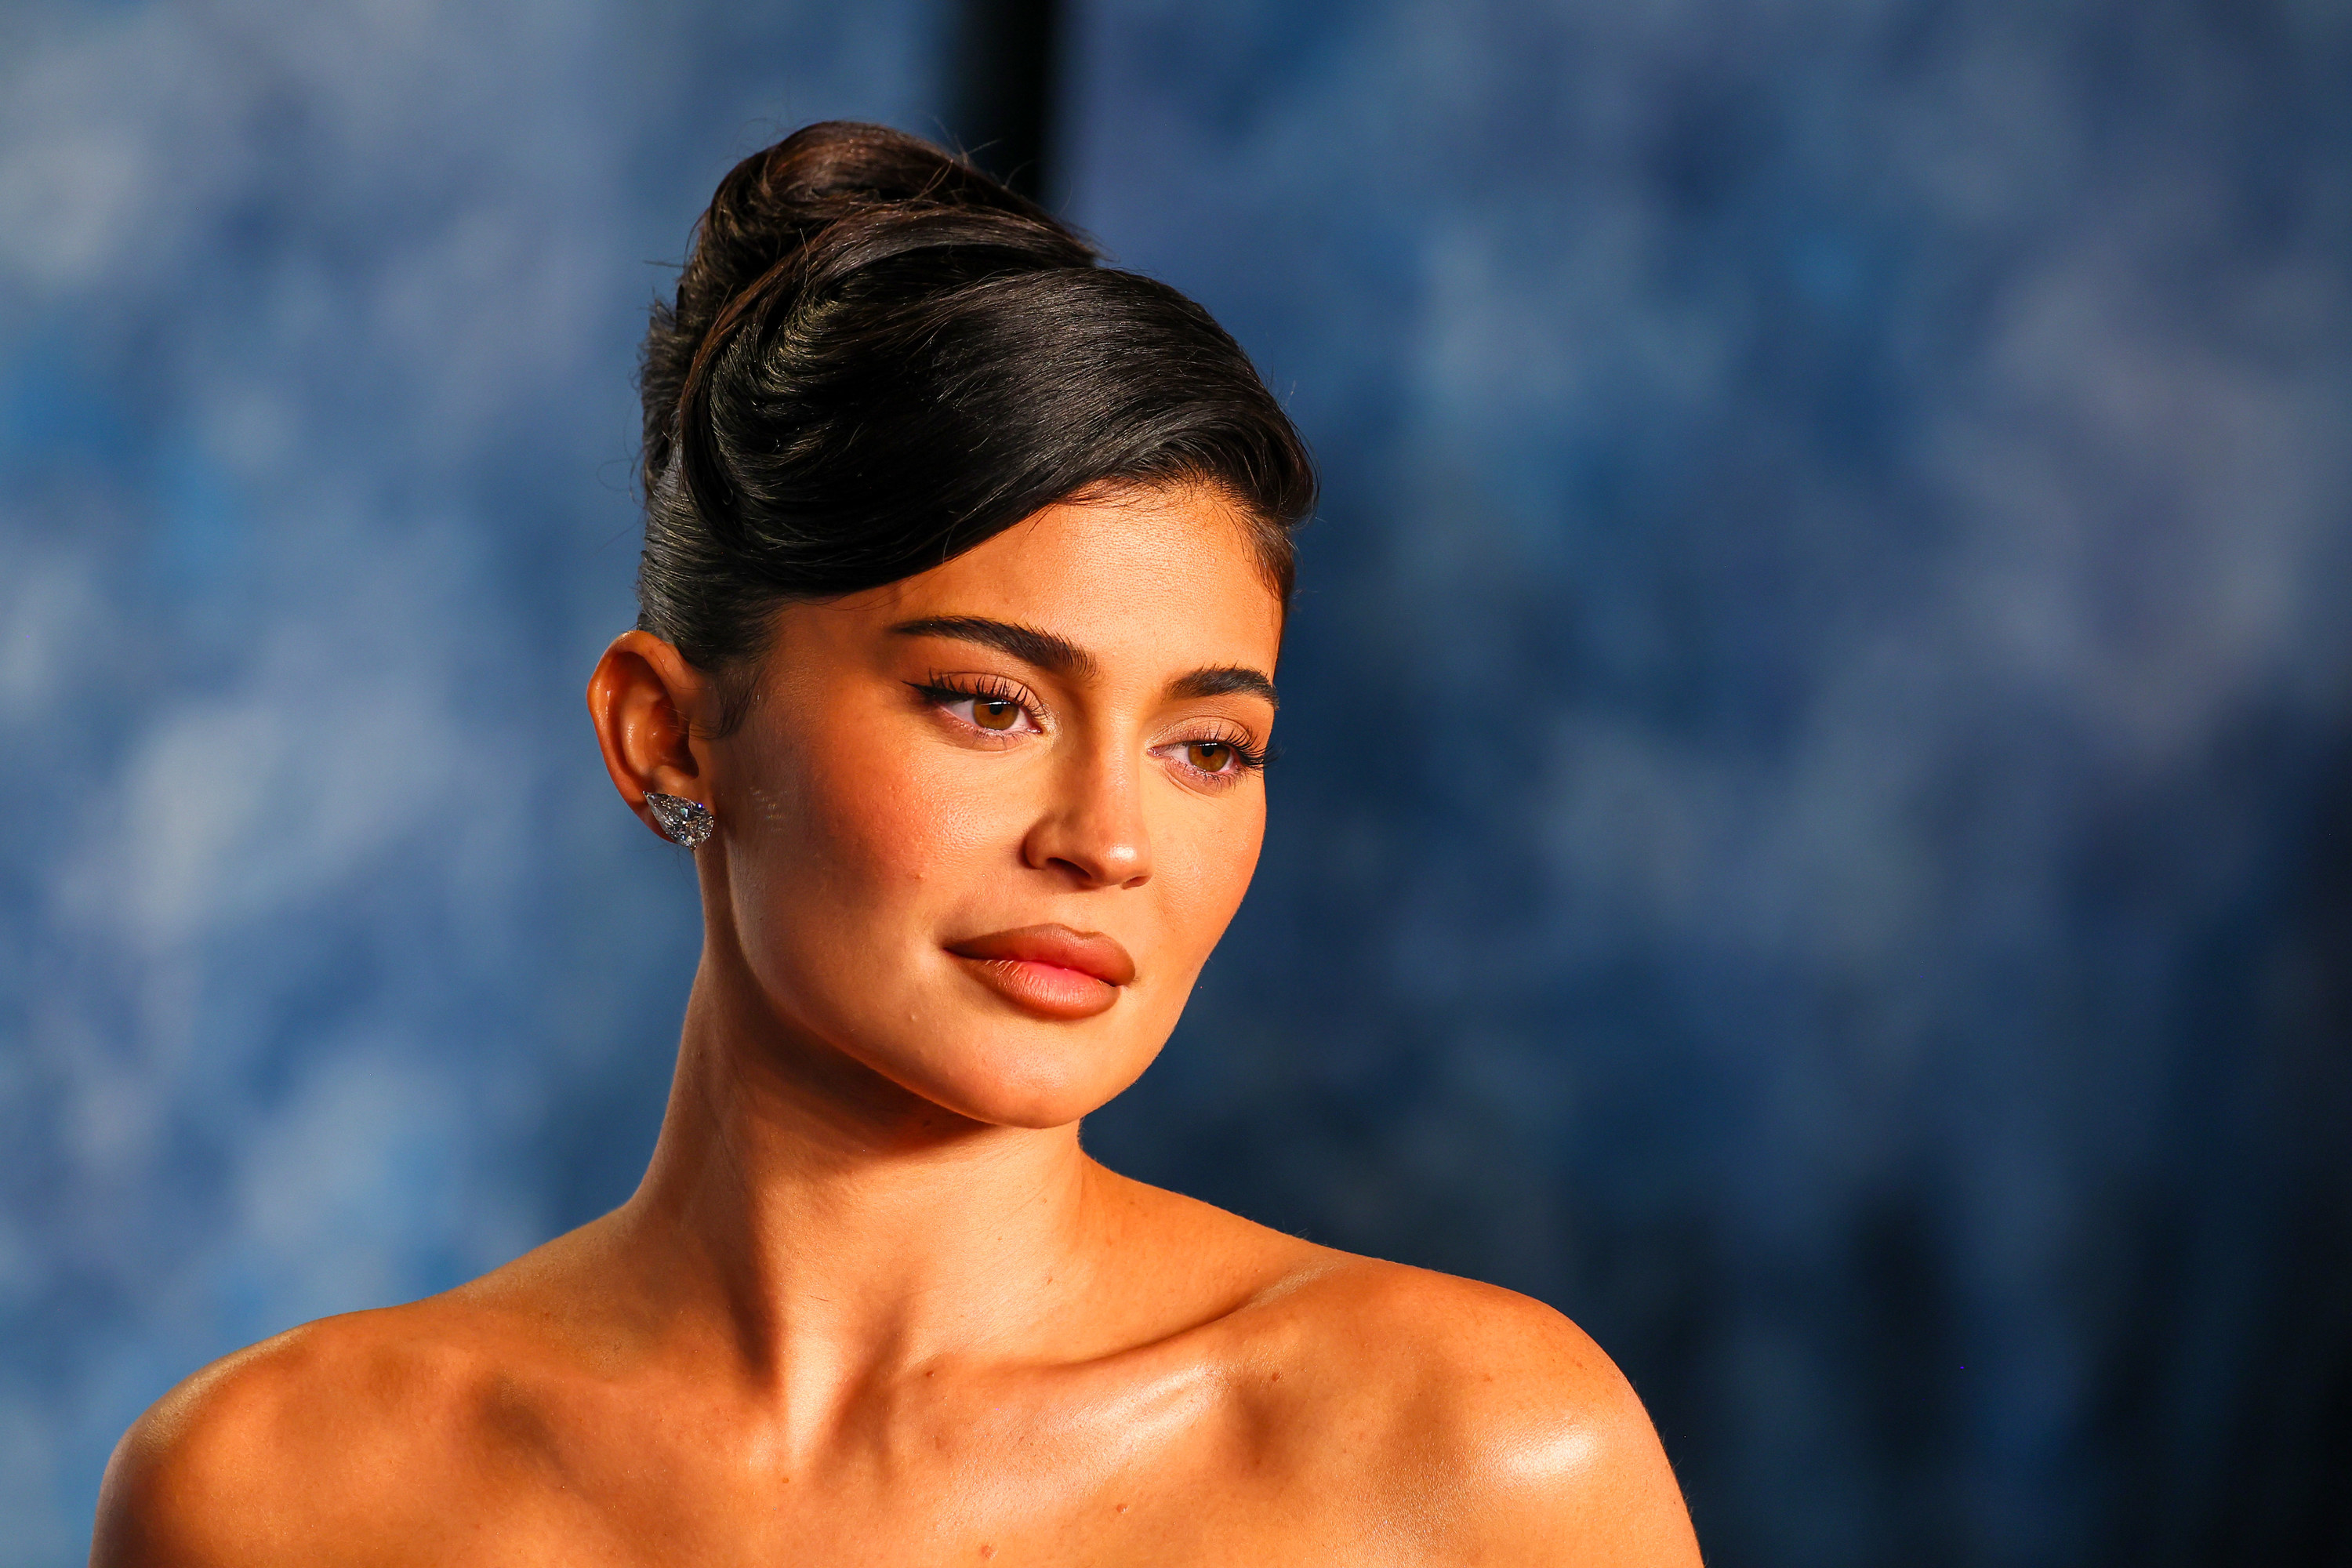 A head and shoulders shot of Kylie, her face neutral, wearing a strapless dress with her hair piled up on top of her head